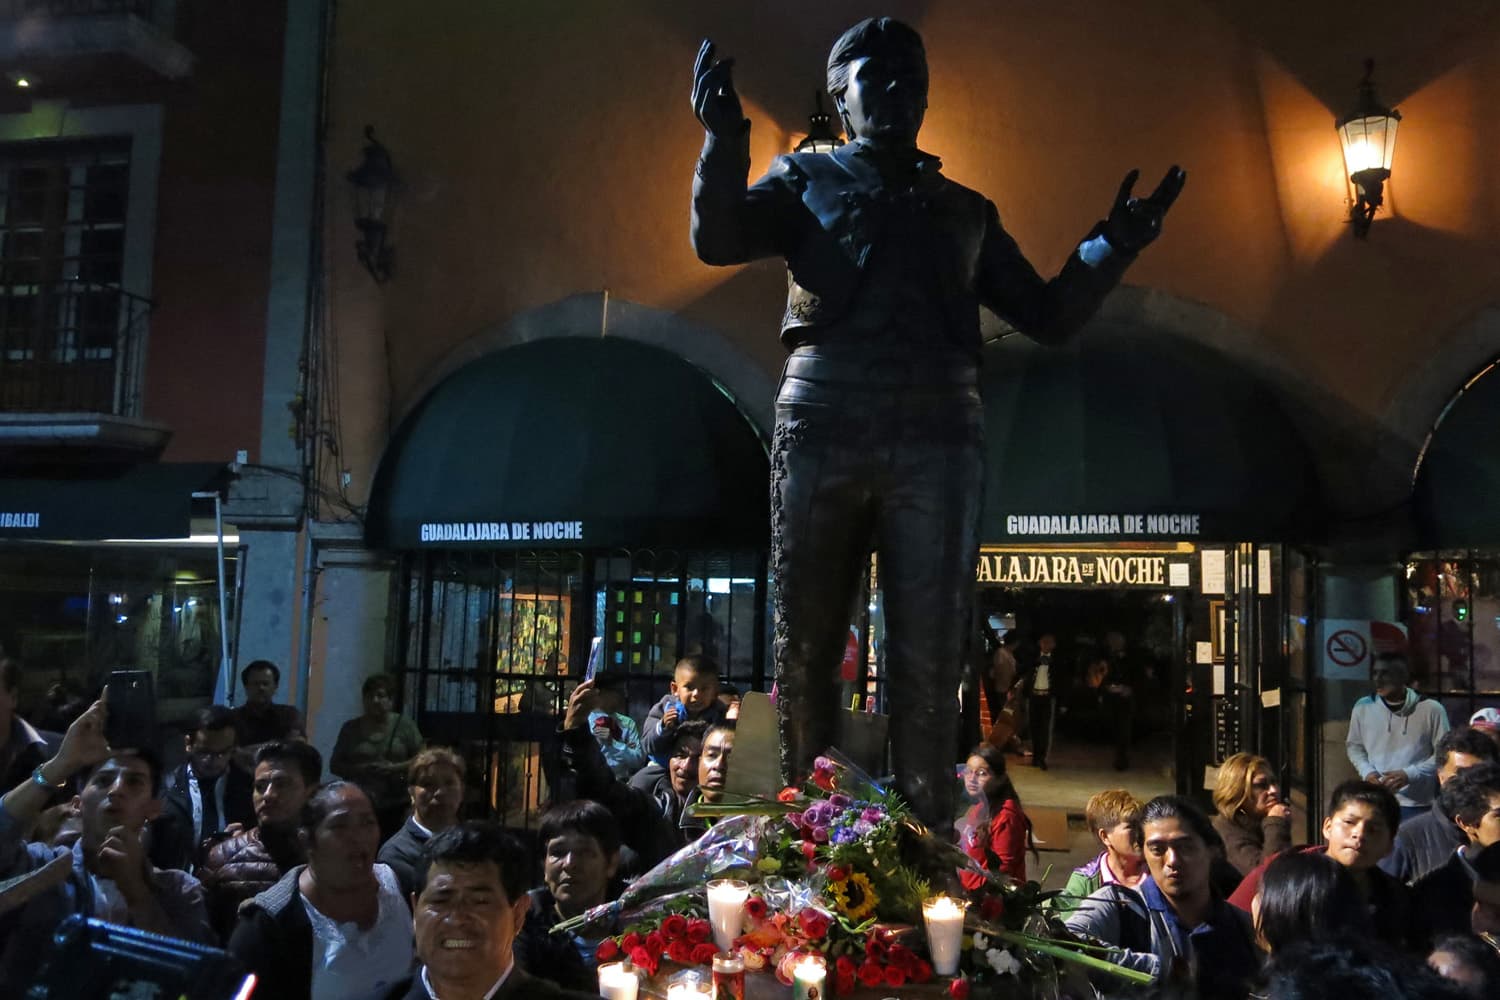 People gather around a statue depicting Mexican superstar songwriter and singer Juan Gabriel in Mexico City's Garibaldi plaza, Sunday Aug. 28, 2016. (Berenice Bautista/AP)